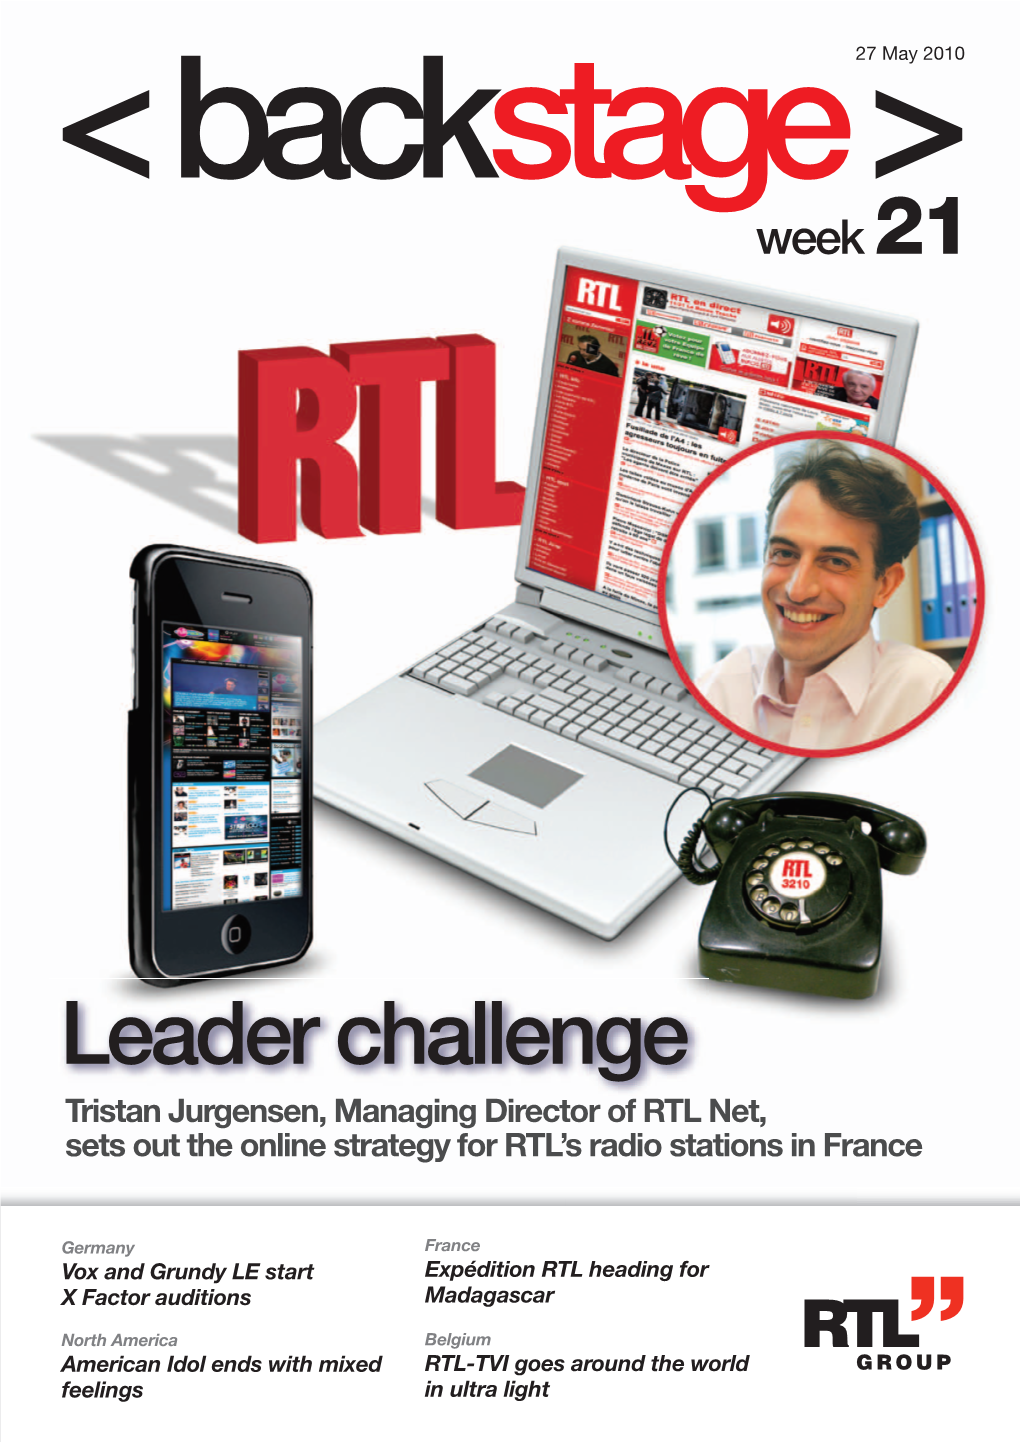 Leader Challenge Tristan Jurgensen, Managing Director of RTL Net, Sets out the Online Strategy for RTL’S Radio Stations in France